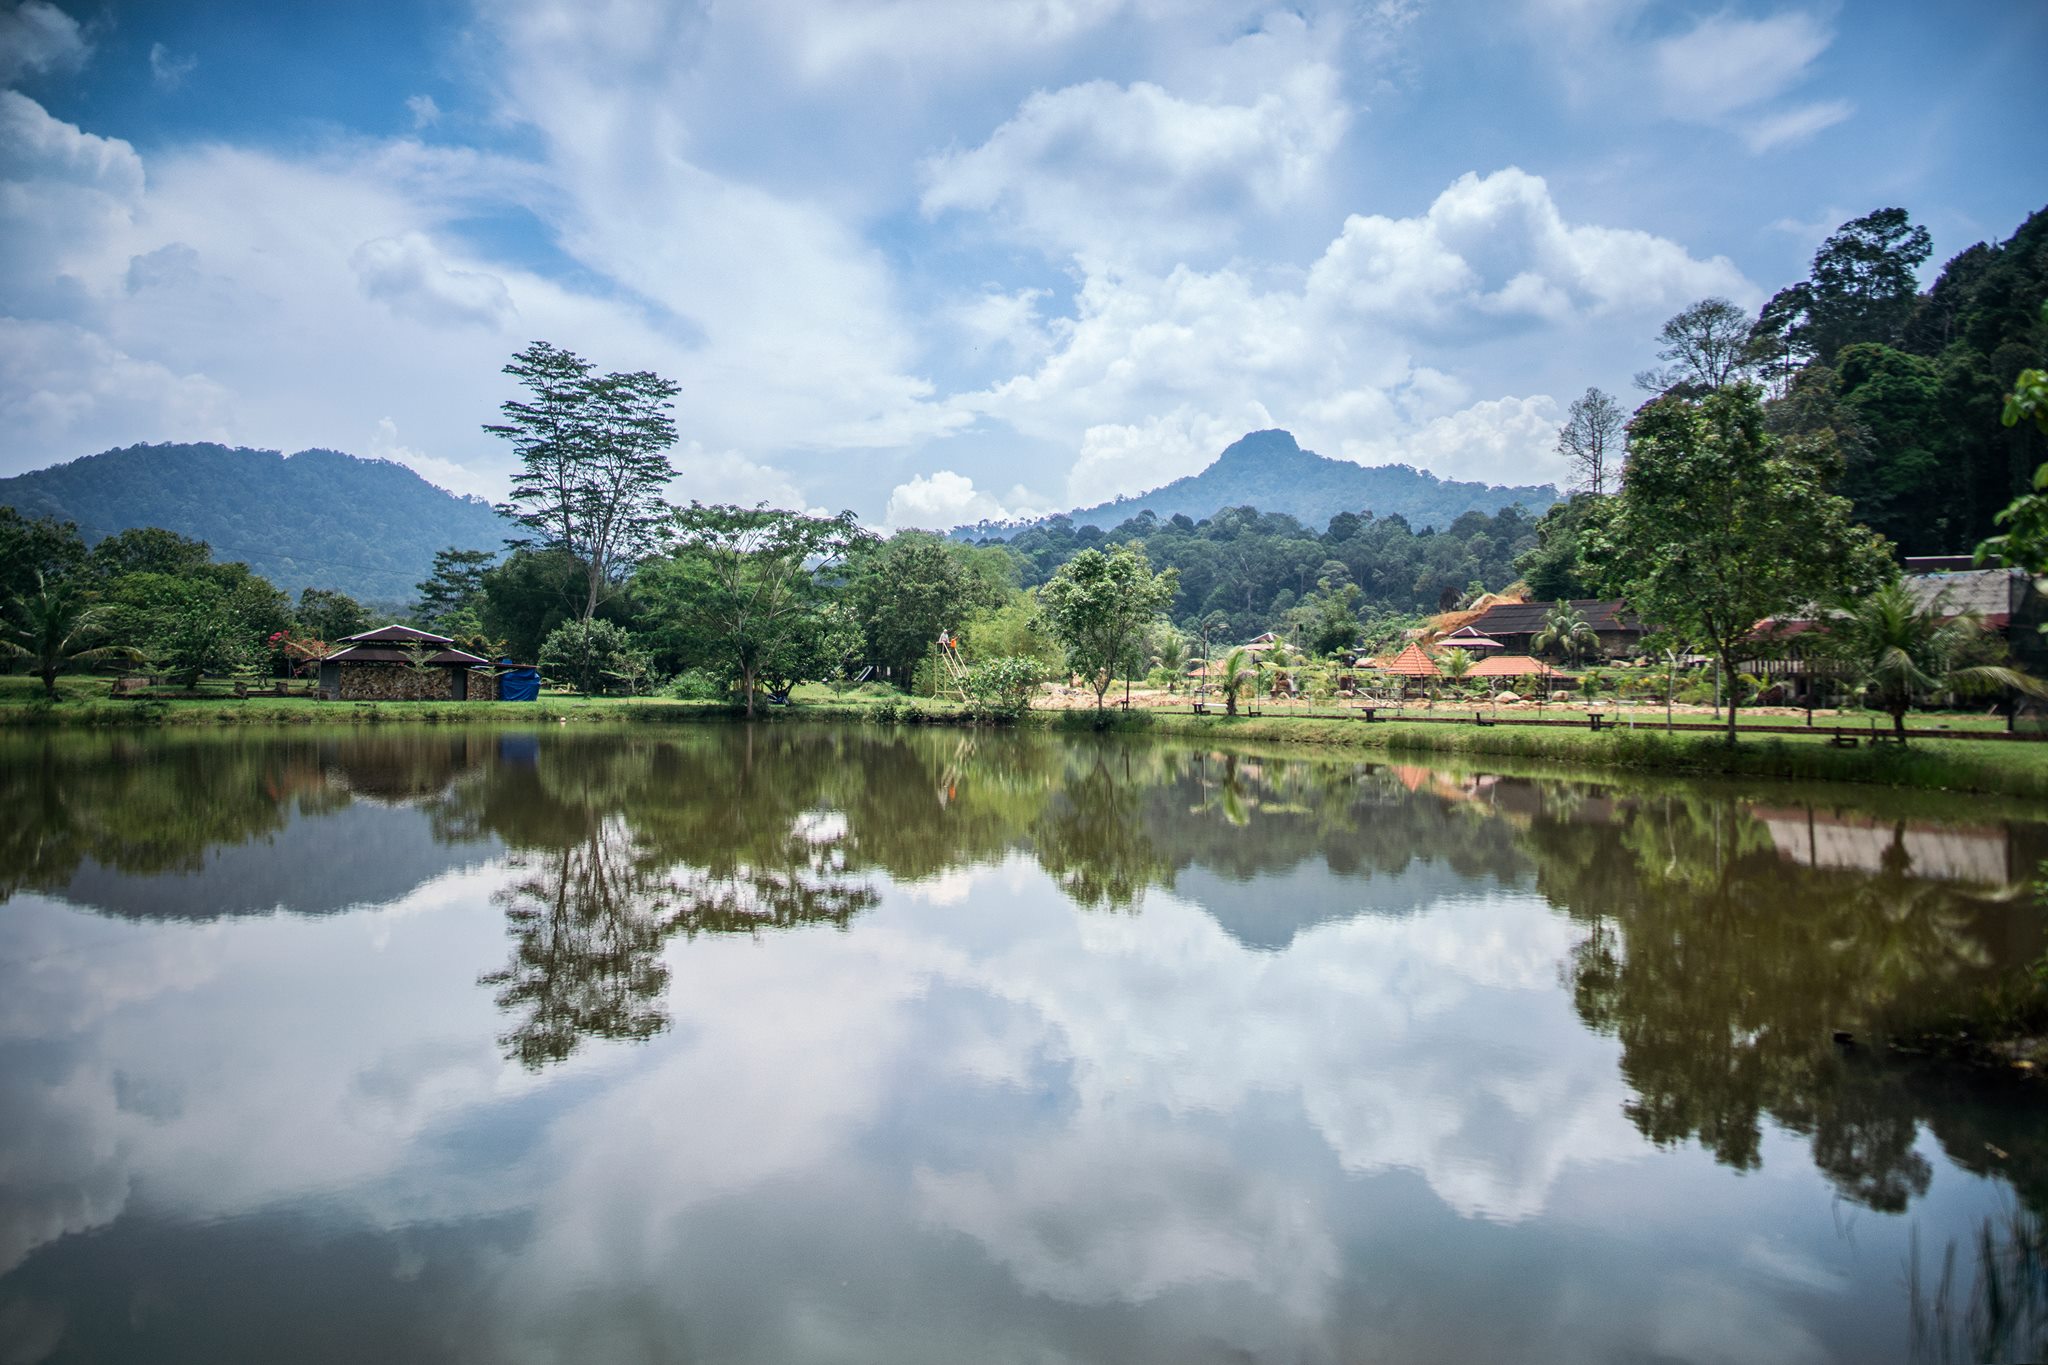 eco tourism meaning in malay